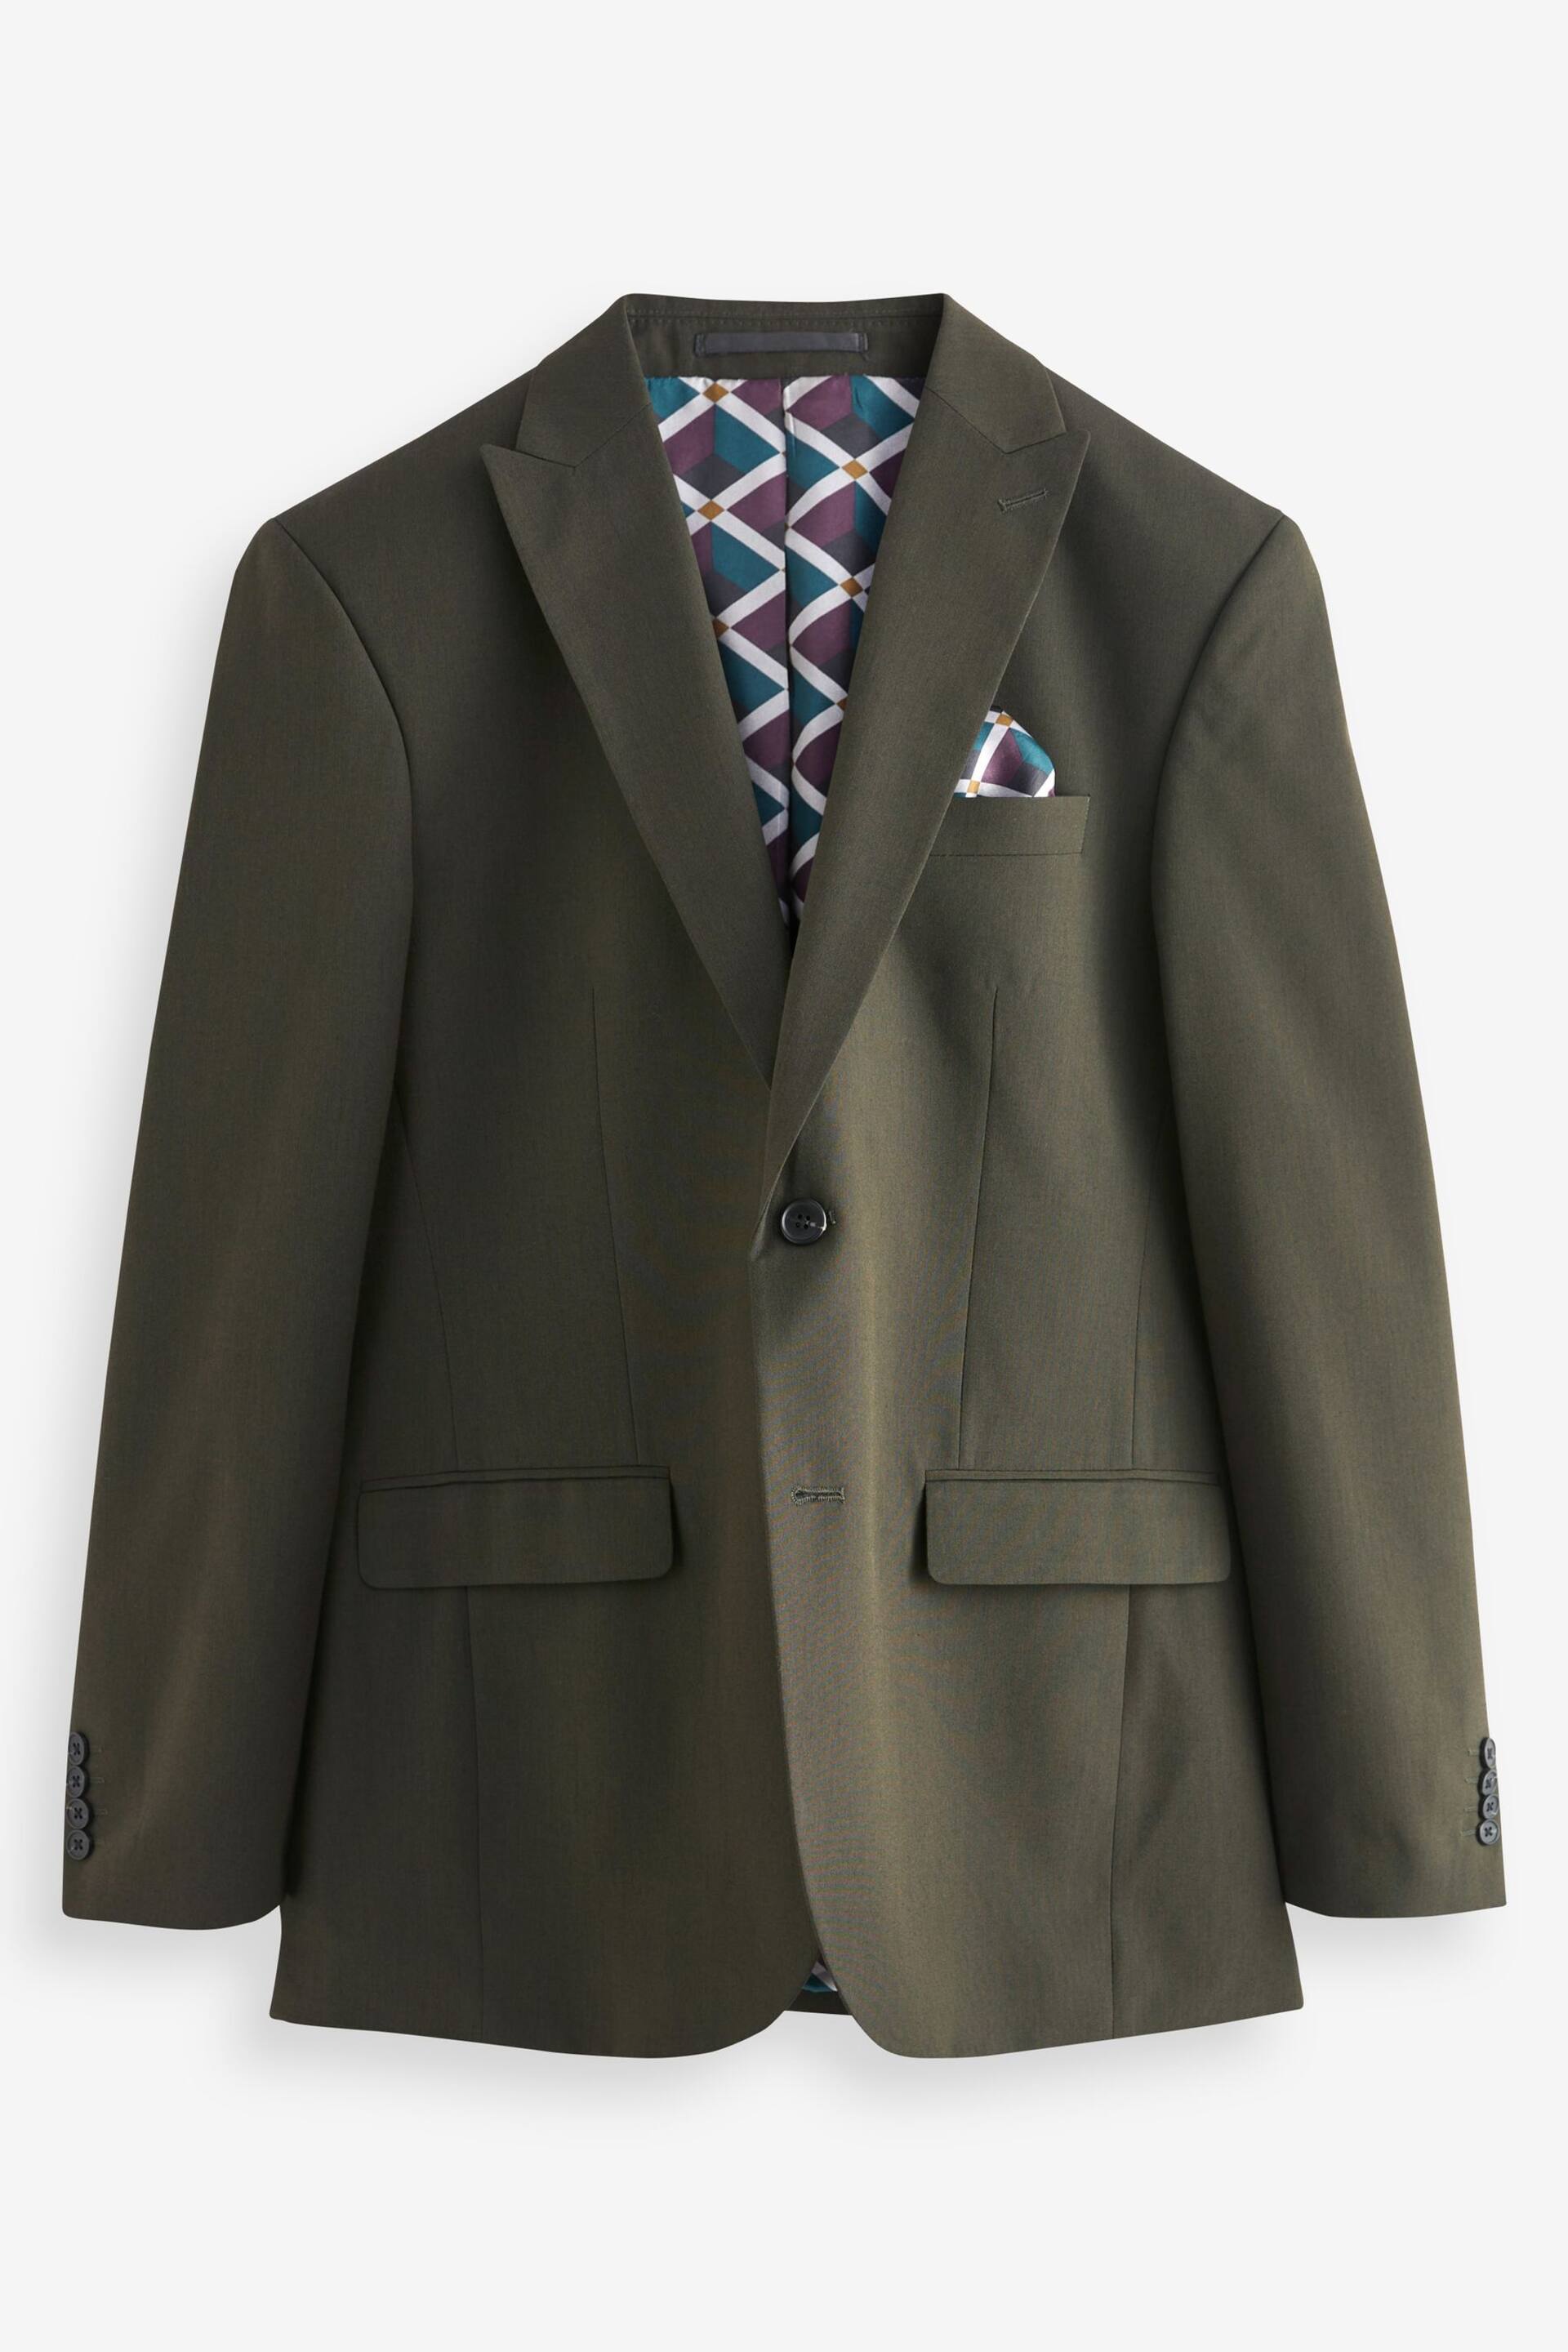 Green Two Button Suit Jacket - Image 5 of 10